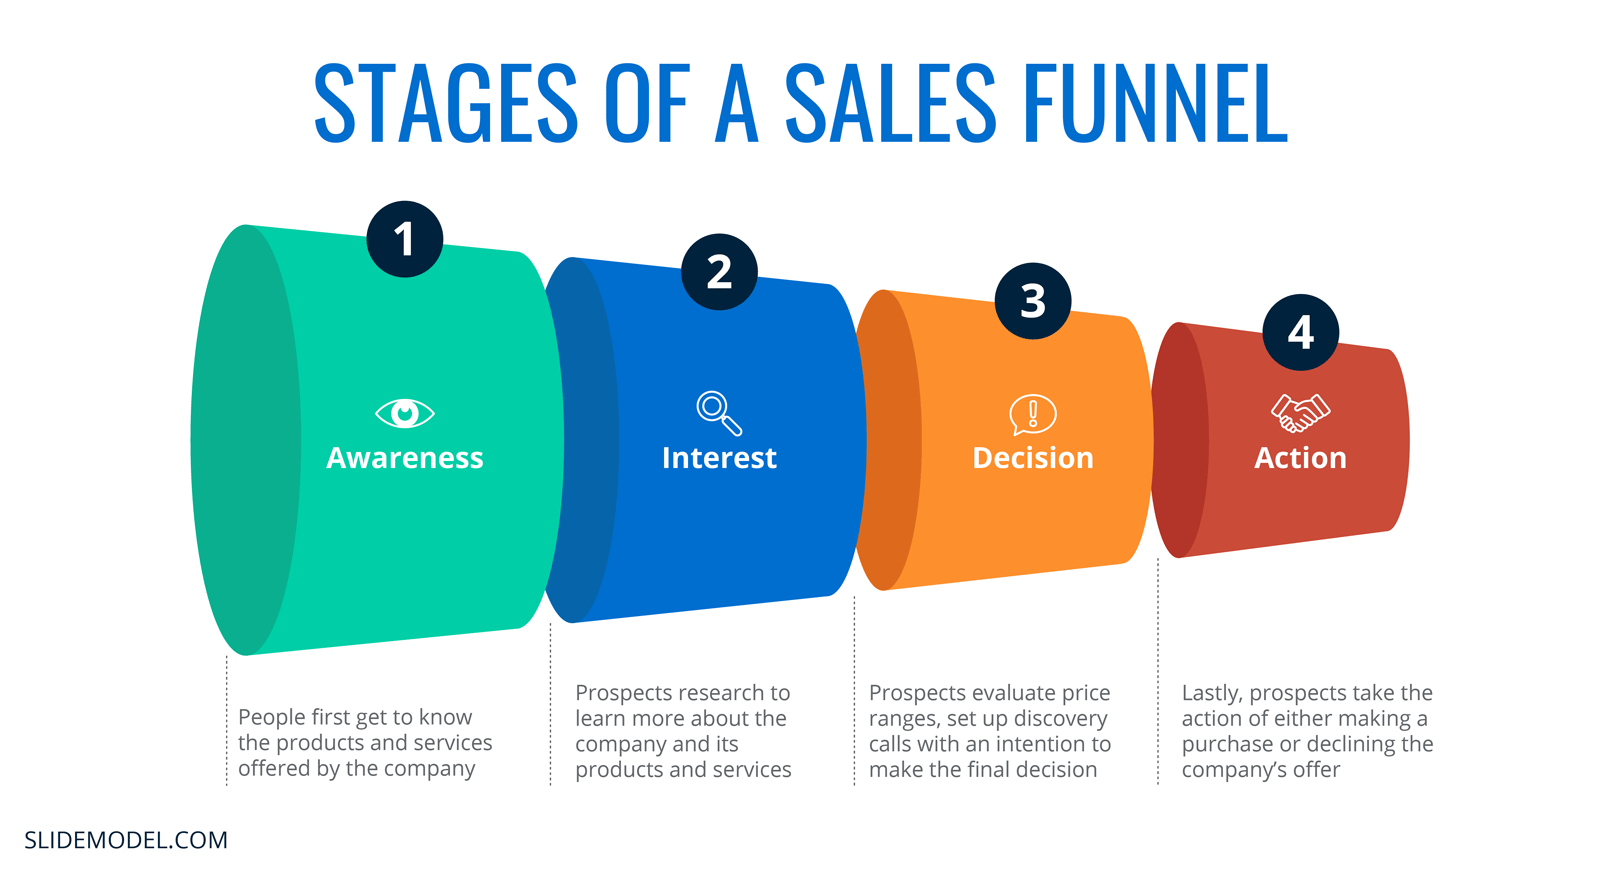 The AIDA Model - Stages of a Sales Funnel - Awareness, Interest, Decision, Action